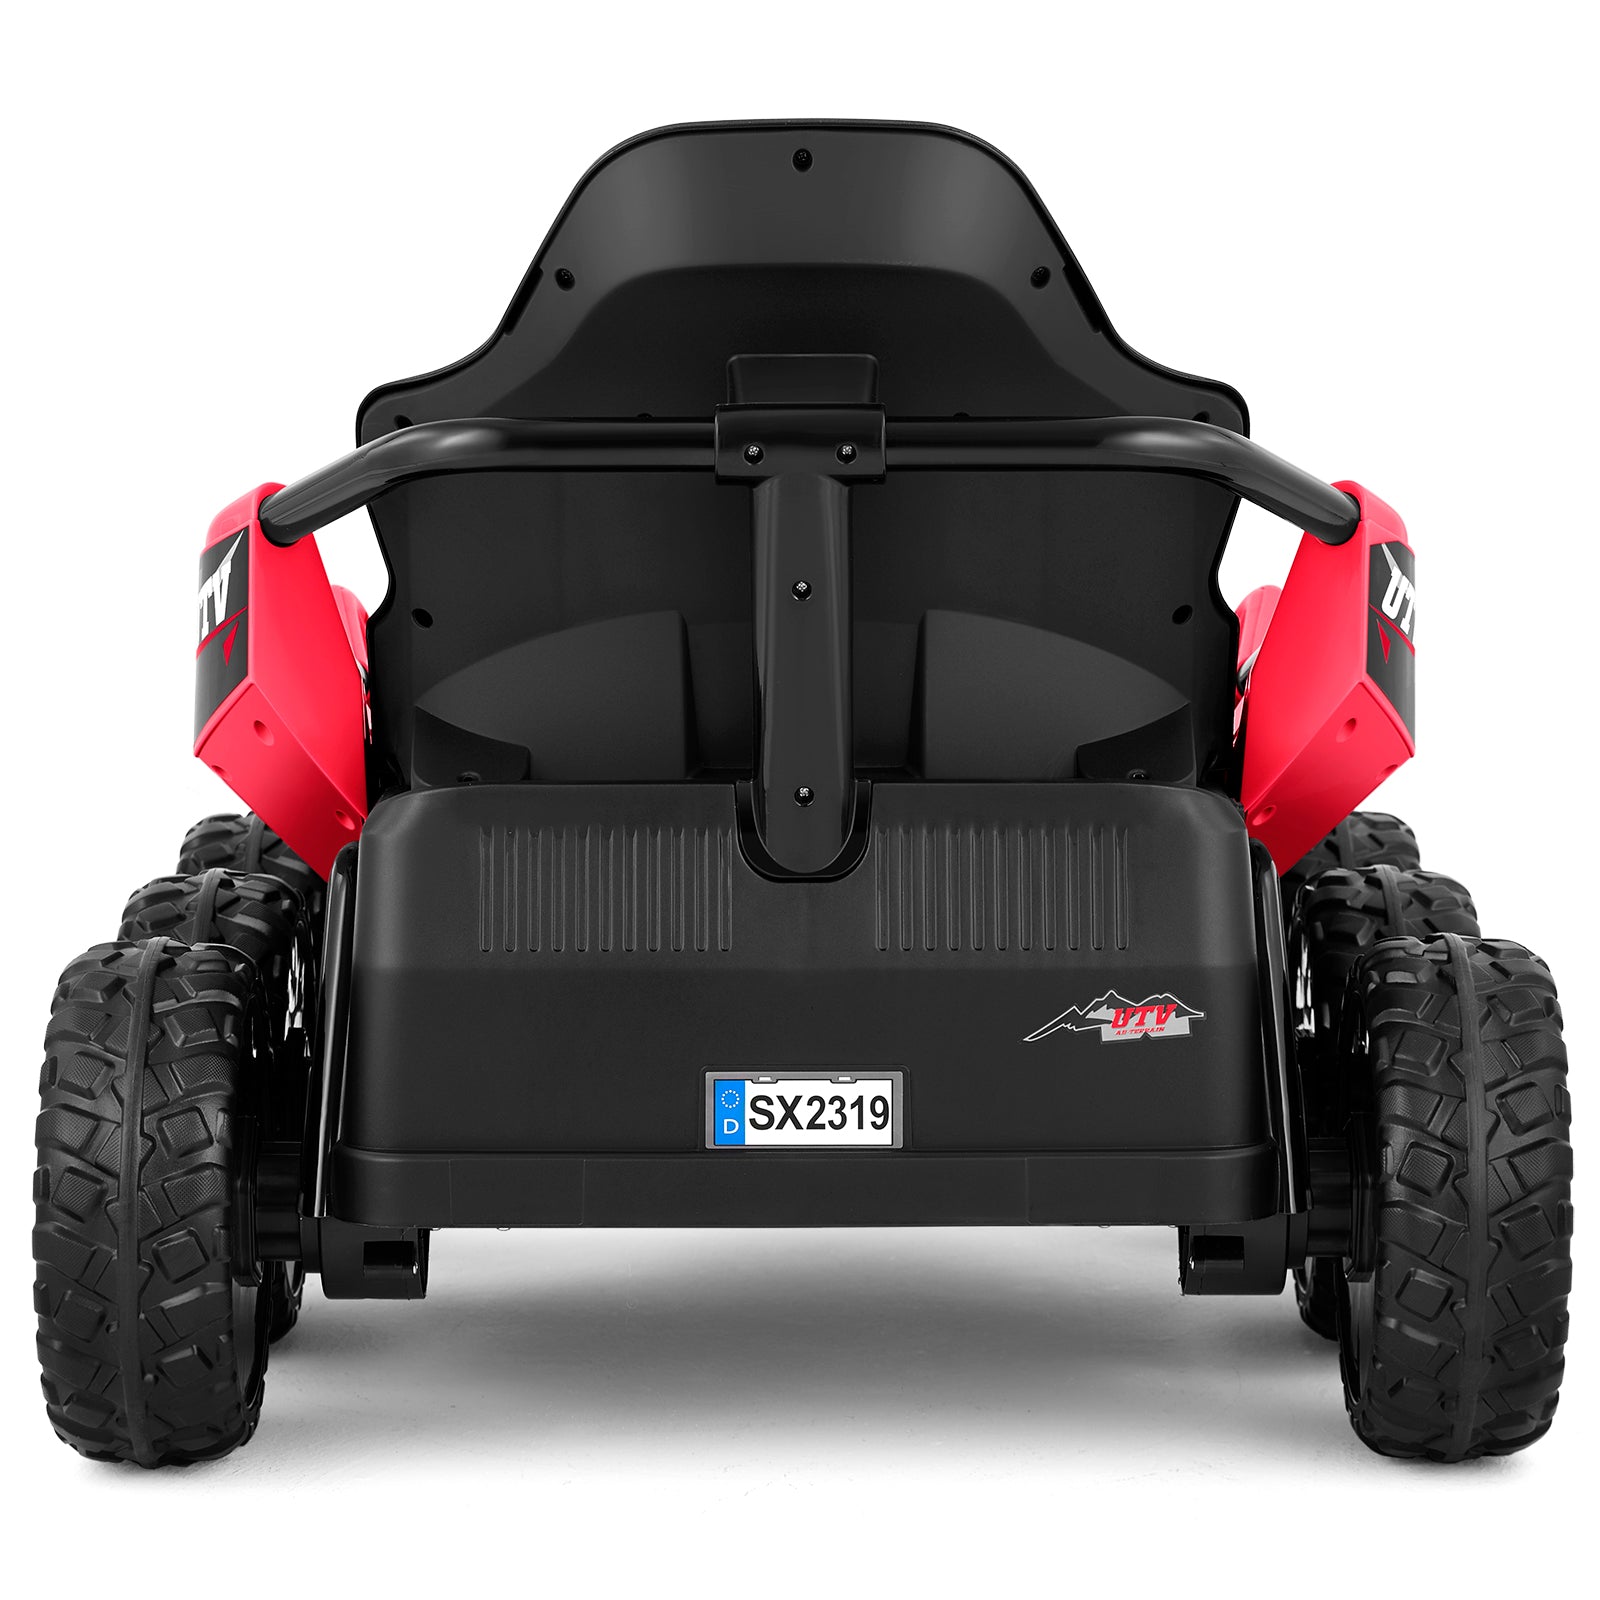 #1162  6x6 Ride On Truck for Big Kids, 4WD/2WD Switchable Kids UTV, 24V Toy Car for 2 Kids, 6-Wheeler W/4x75w Engines, 2.4G Remote Control, Music,MP4, Bluetooth, Lights, Spring Suspension